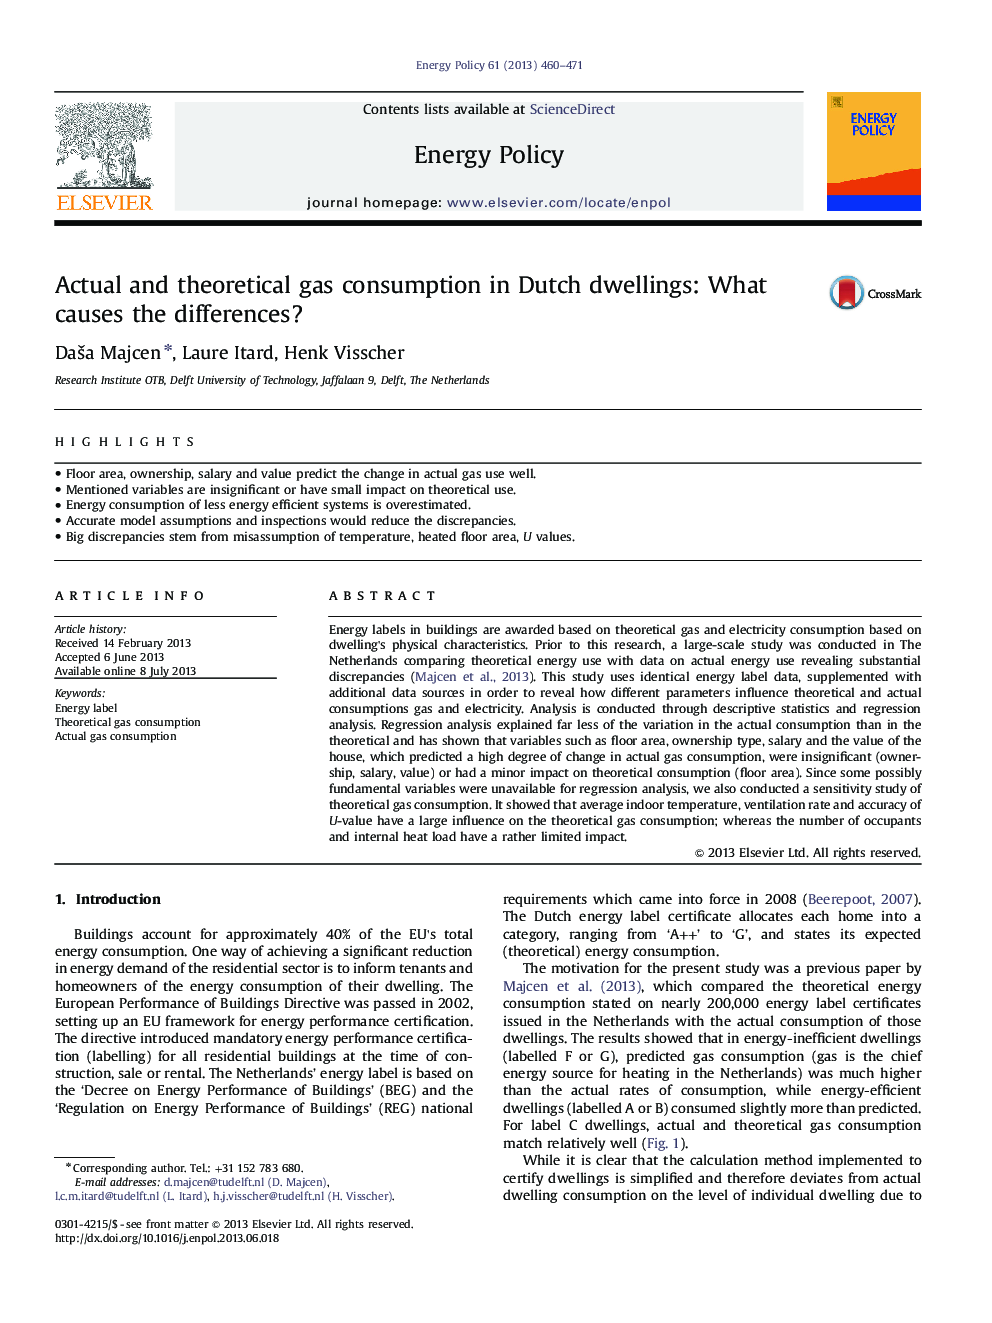 Actual and theoretical gas consumption in Dutch dwellings: What causes the differences?